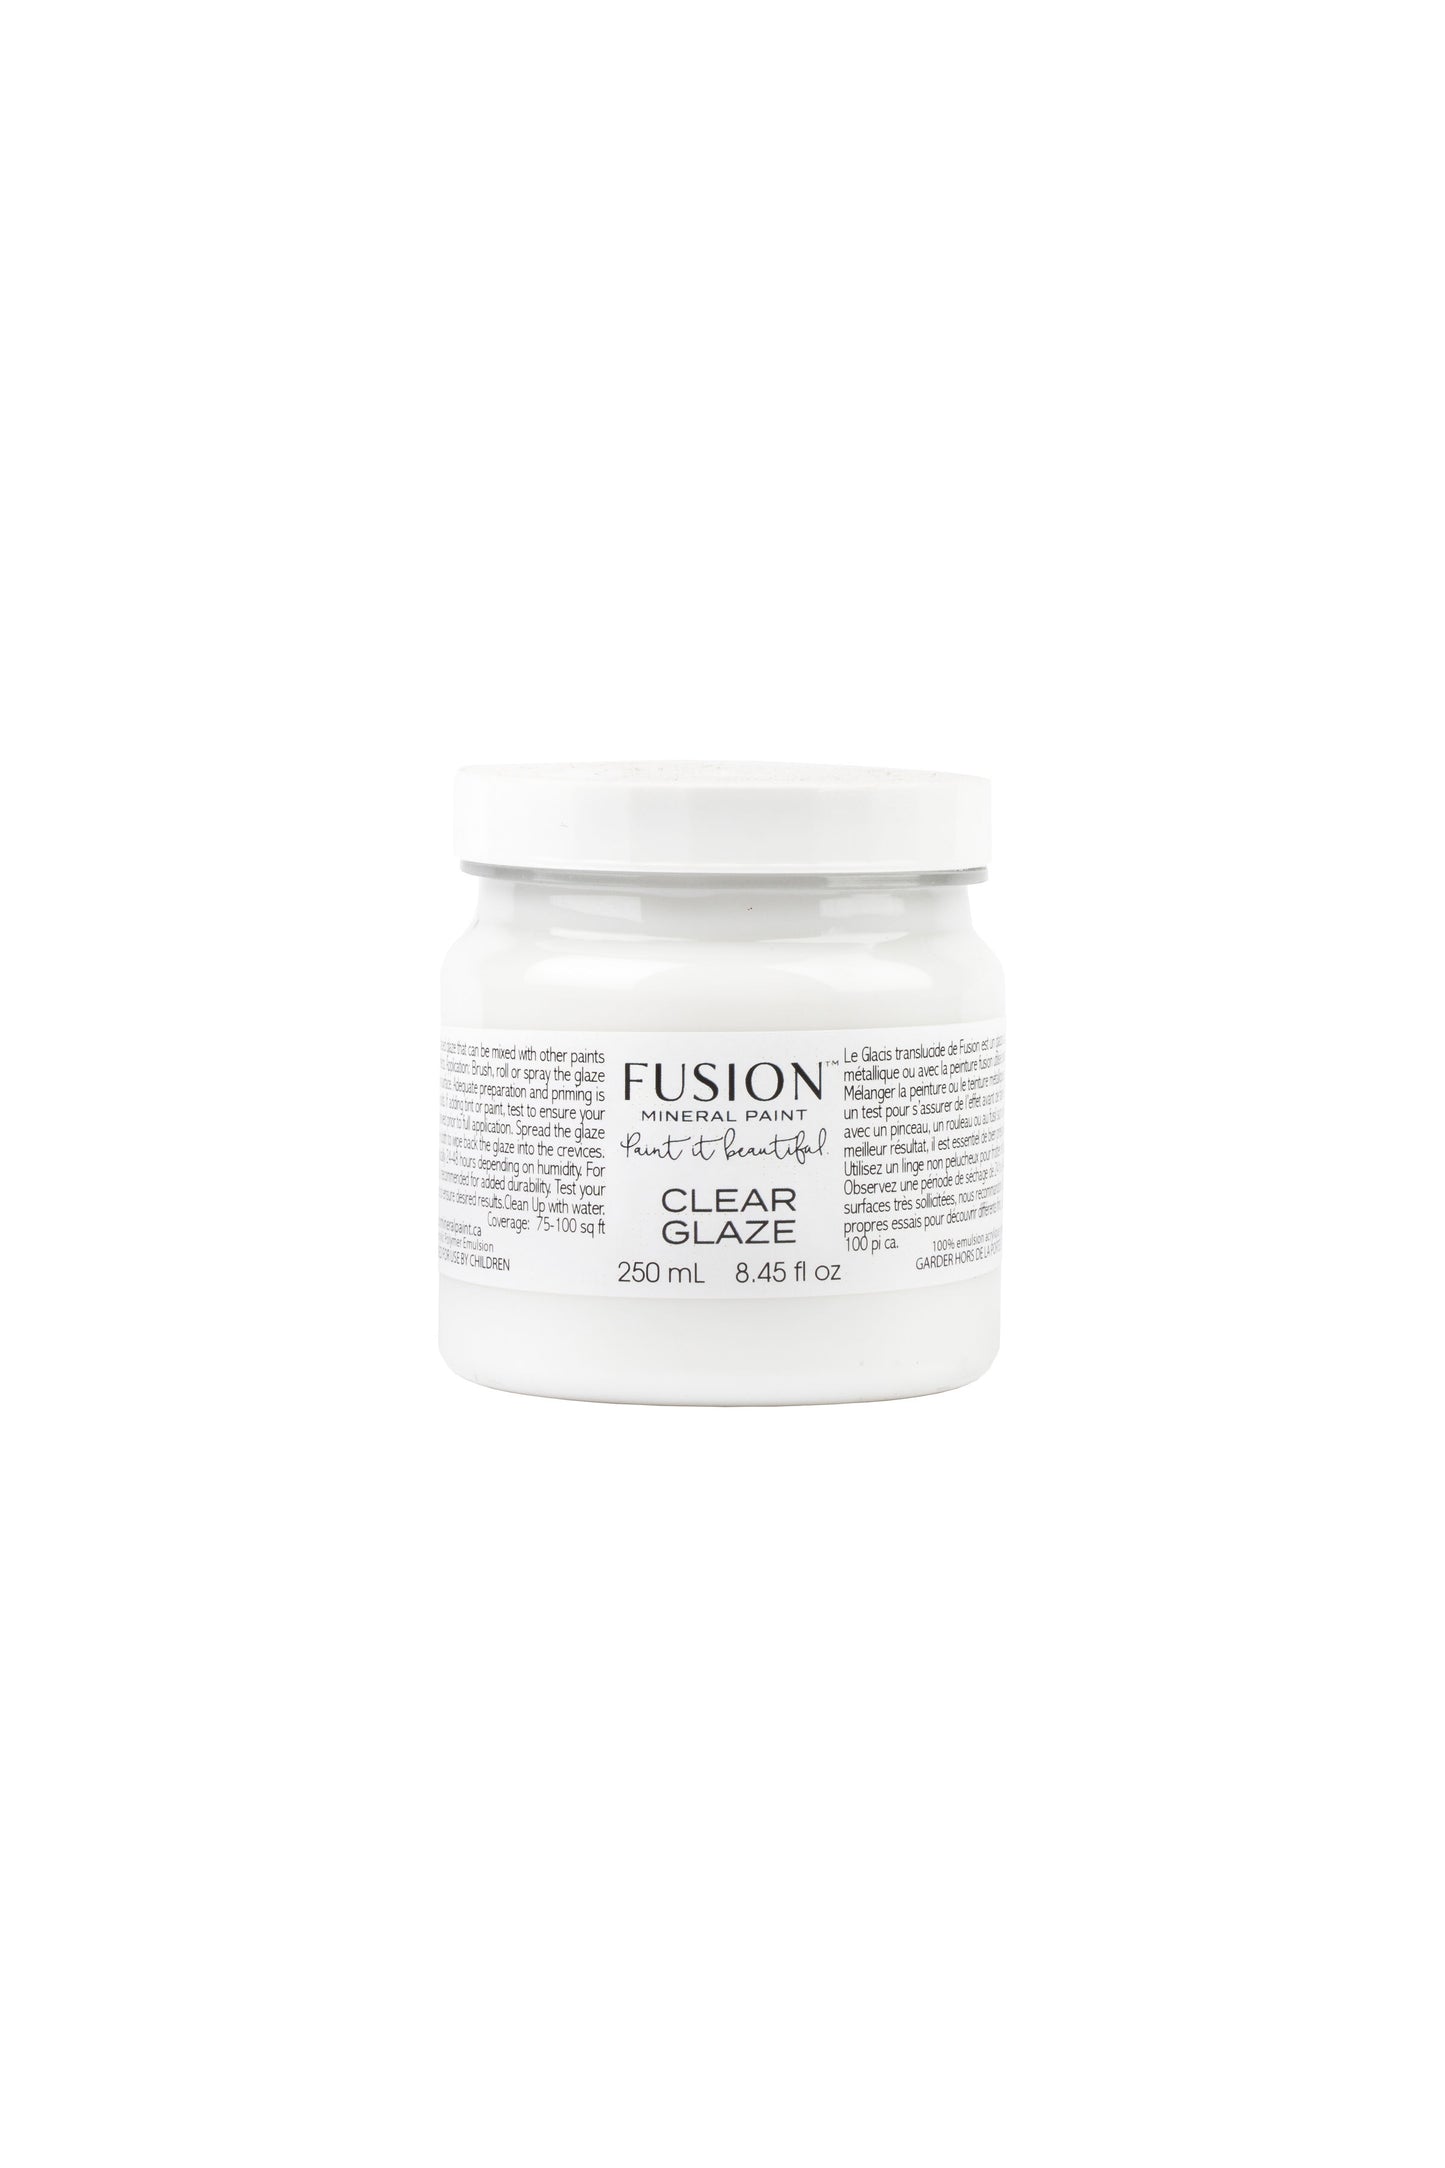 Fusion Mineral Paint, Clear Glaze - 250 ml, Old to New Furniture